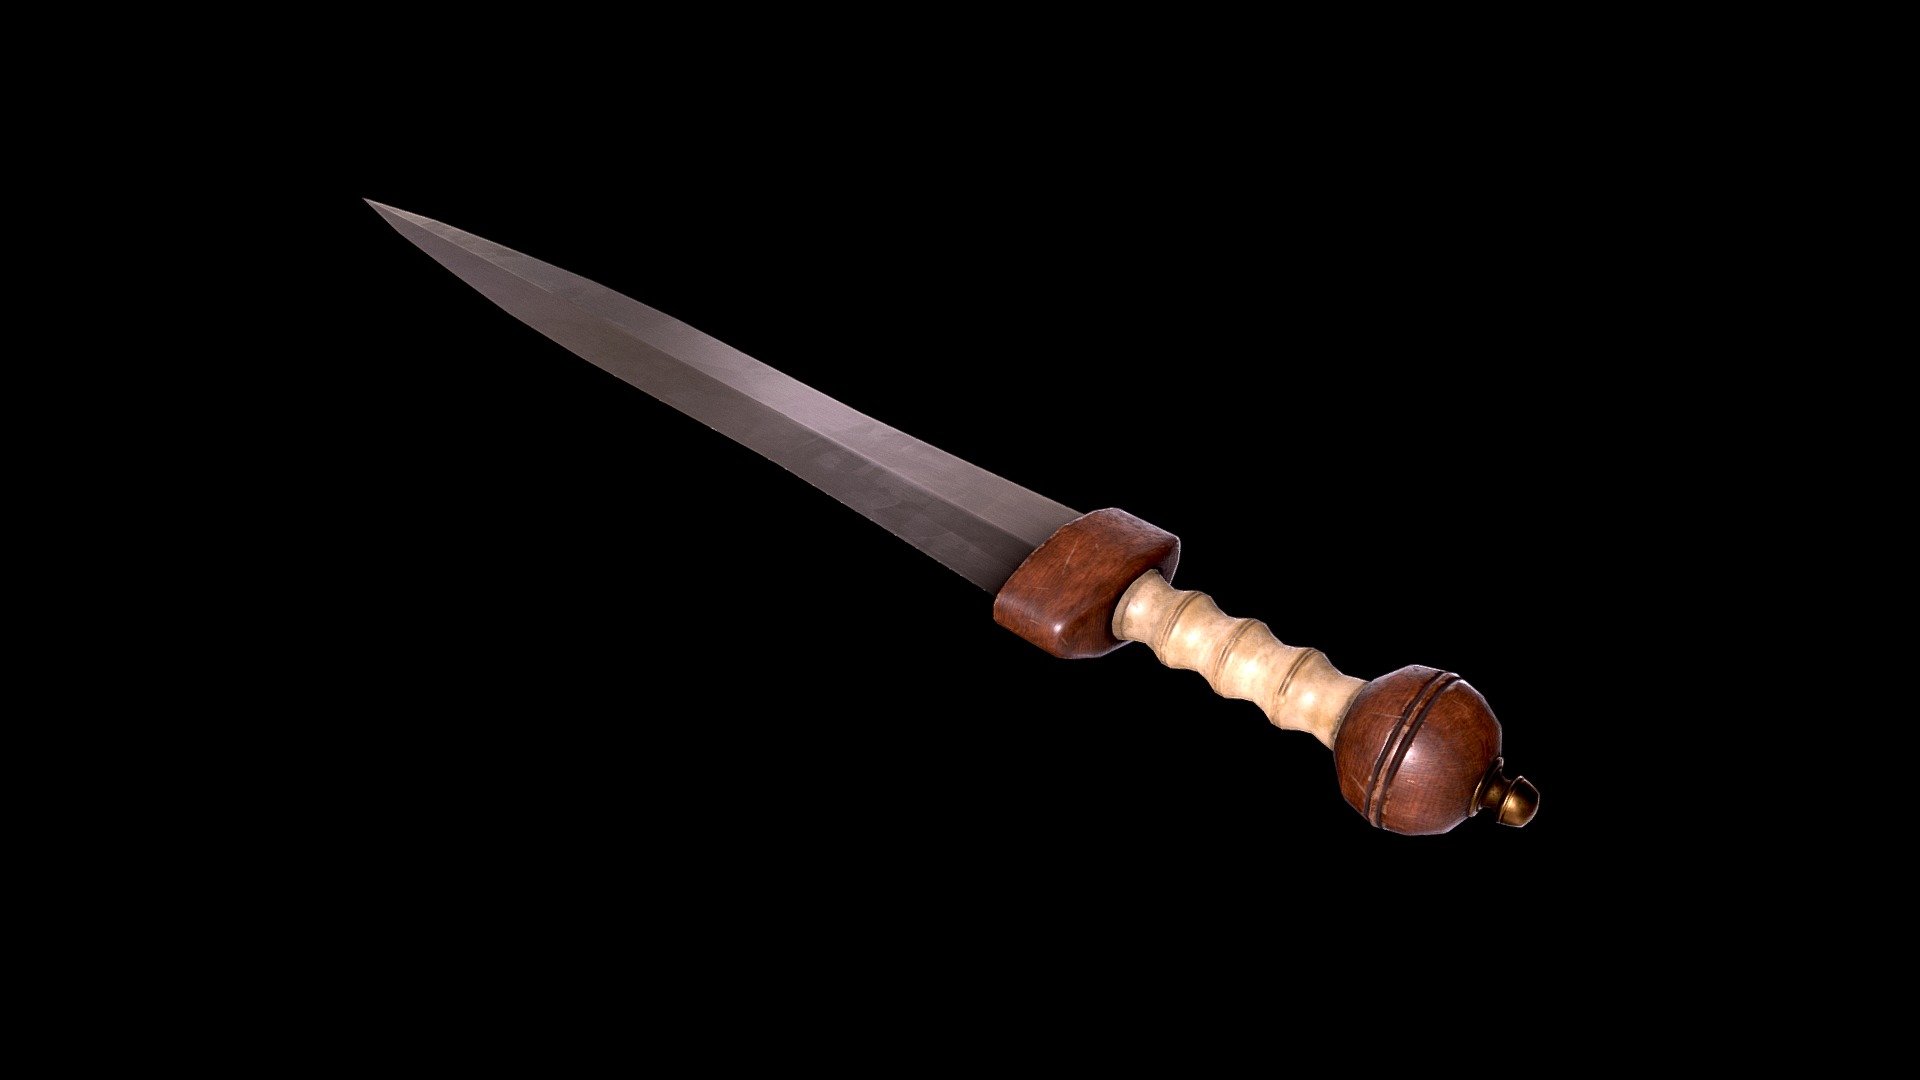 This is an accurate reconstruction of the iconic Roman Gladius with the Mainz pattern type blade. Dimensions, shapes and materials are attempted to be as authentic as possible.

Besides the low poly model, a high poly model was also created to project the sculpting details onto the textures for higher quality.

Included are obj., dae. and fbx. files of the low poly and a obj. file of the high poly, besides the original blend. file. PBR Metal/Roughness textures are provided as well as the Spec/Gloss textures + additional textures. Other configurations possibly available upon request.

Texture size: 2048x2048



First model with Blender (and probably last :D). Curious so I had to give it a try 3d model